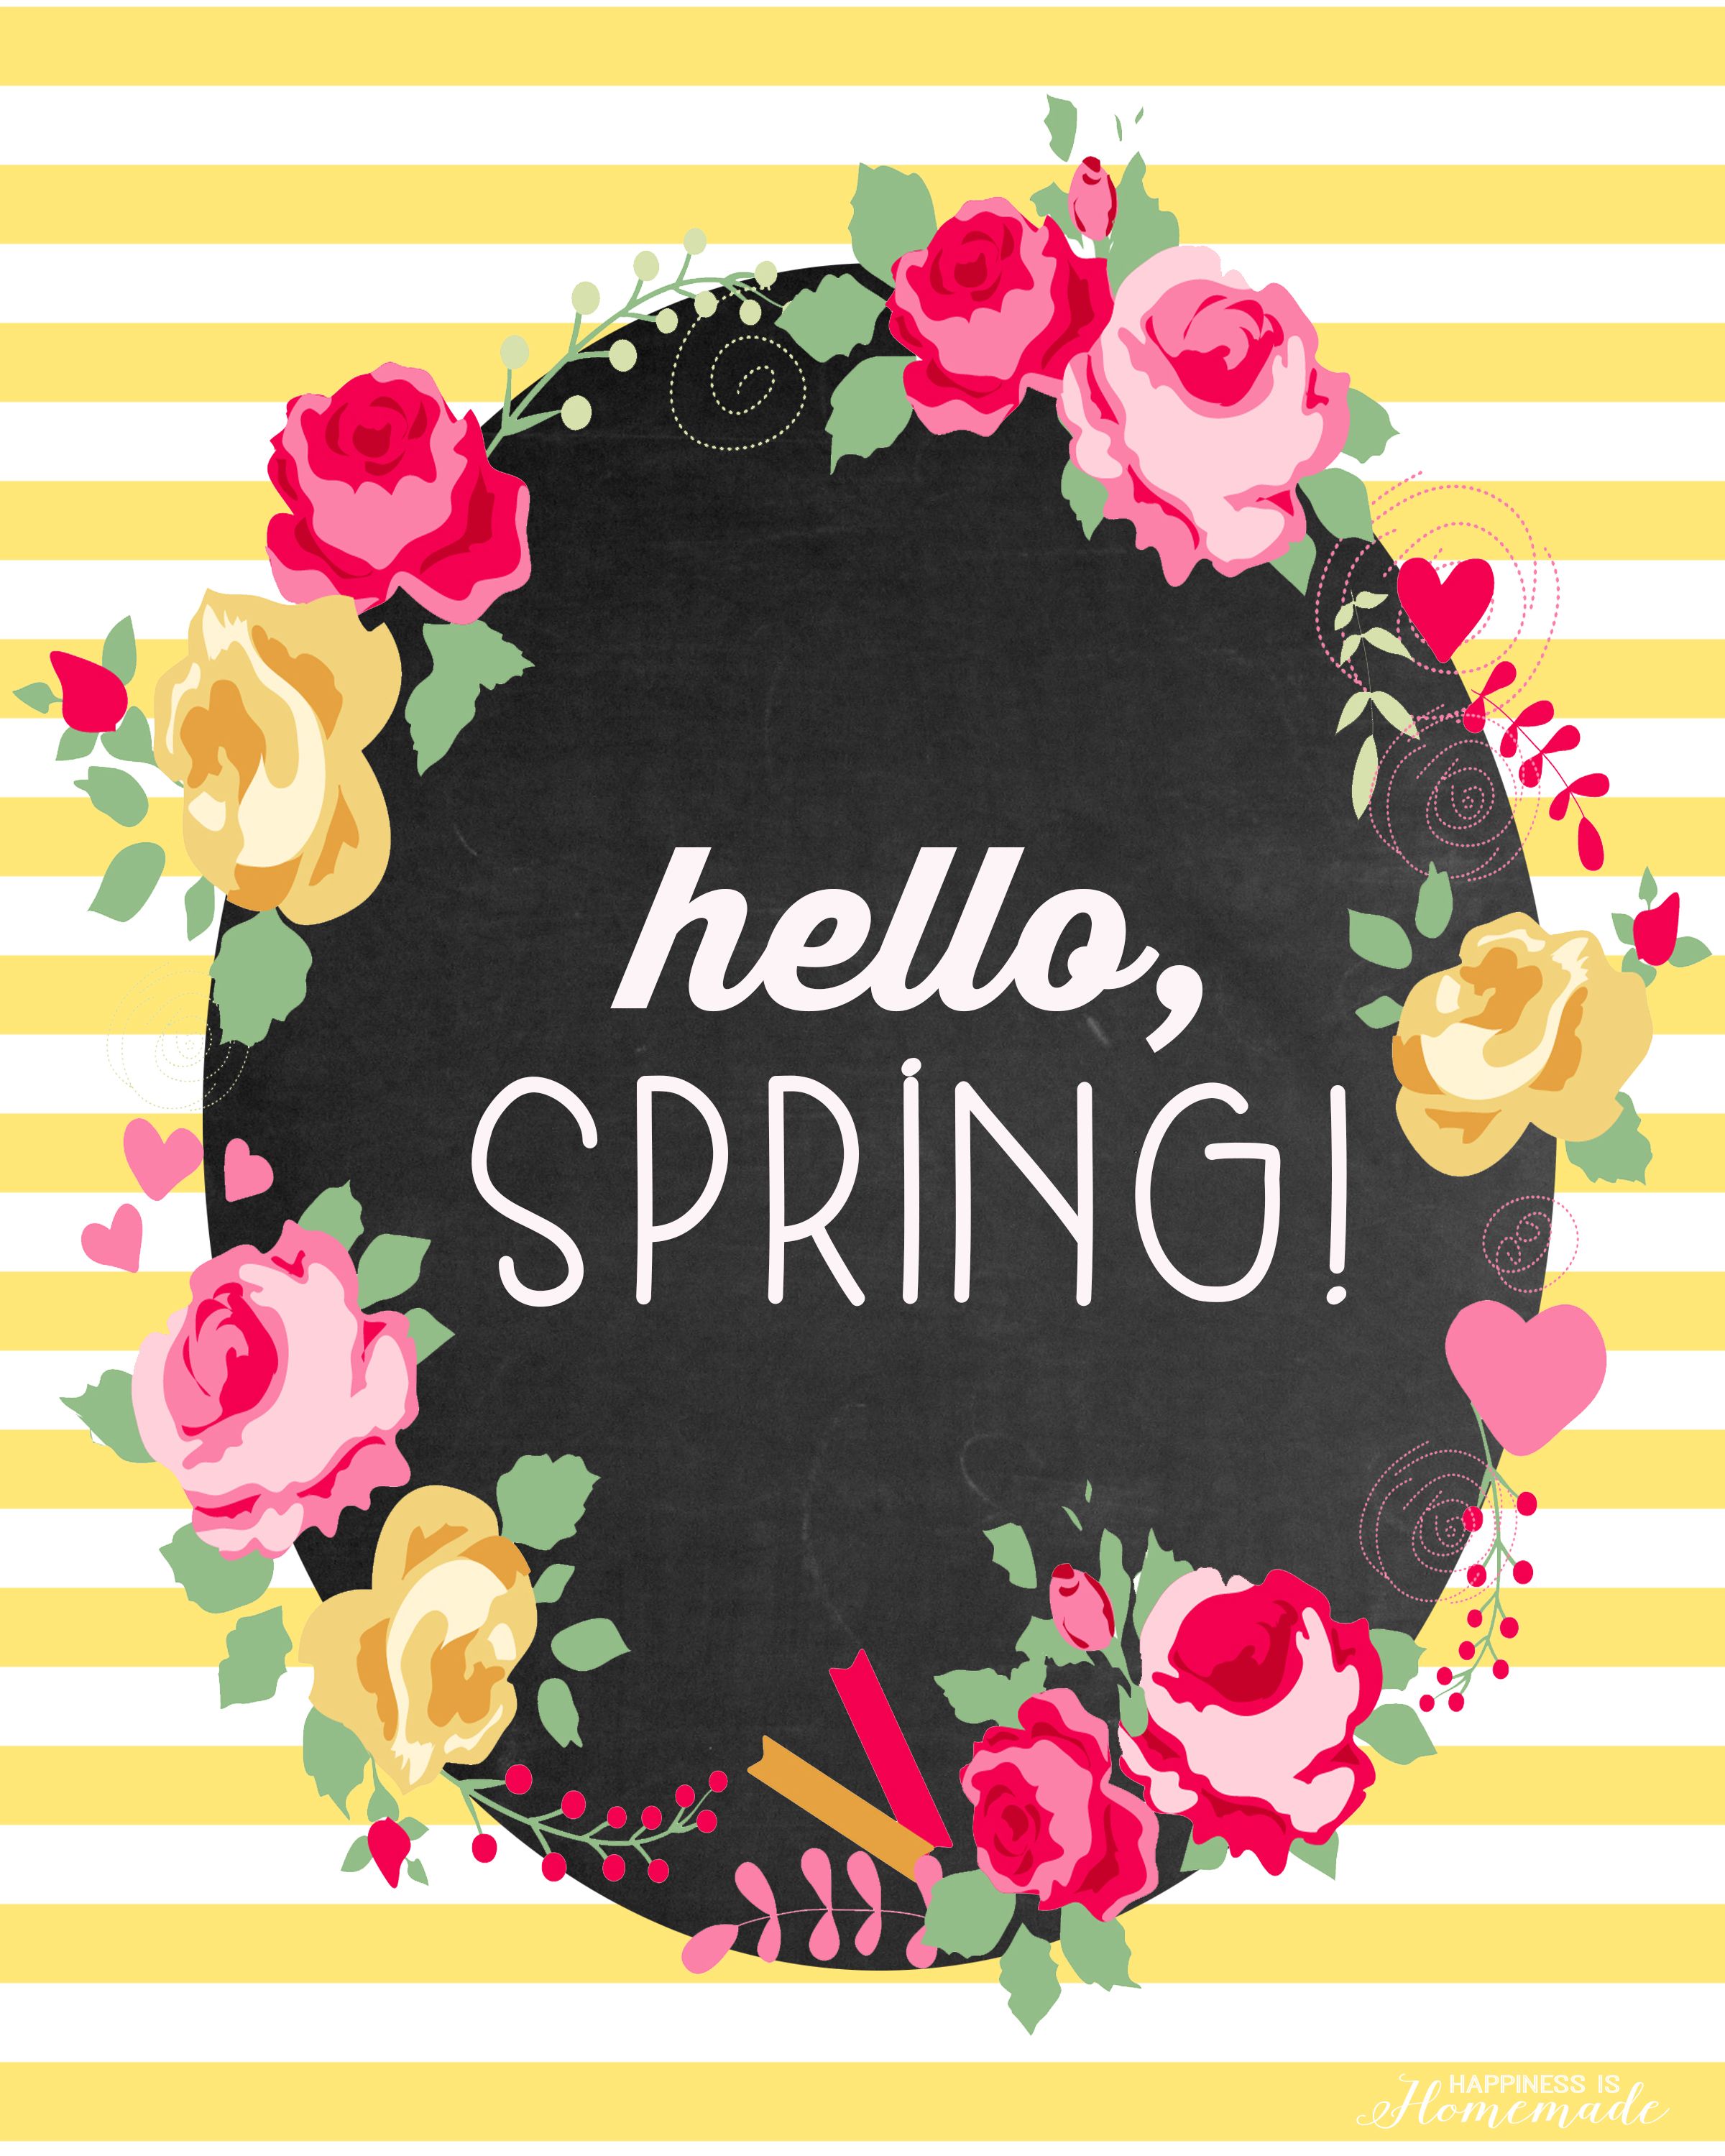 This cute floral and chalkboard Hello, Spring! printable is a